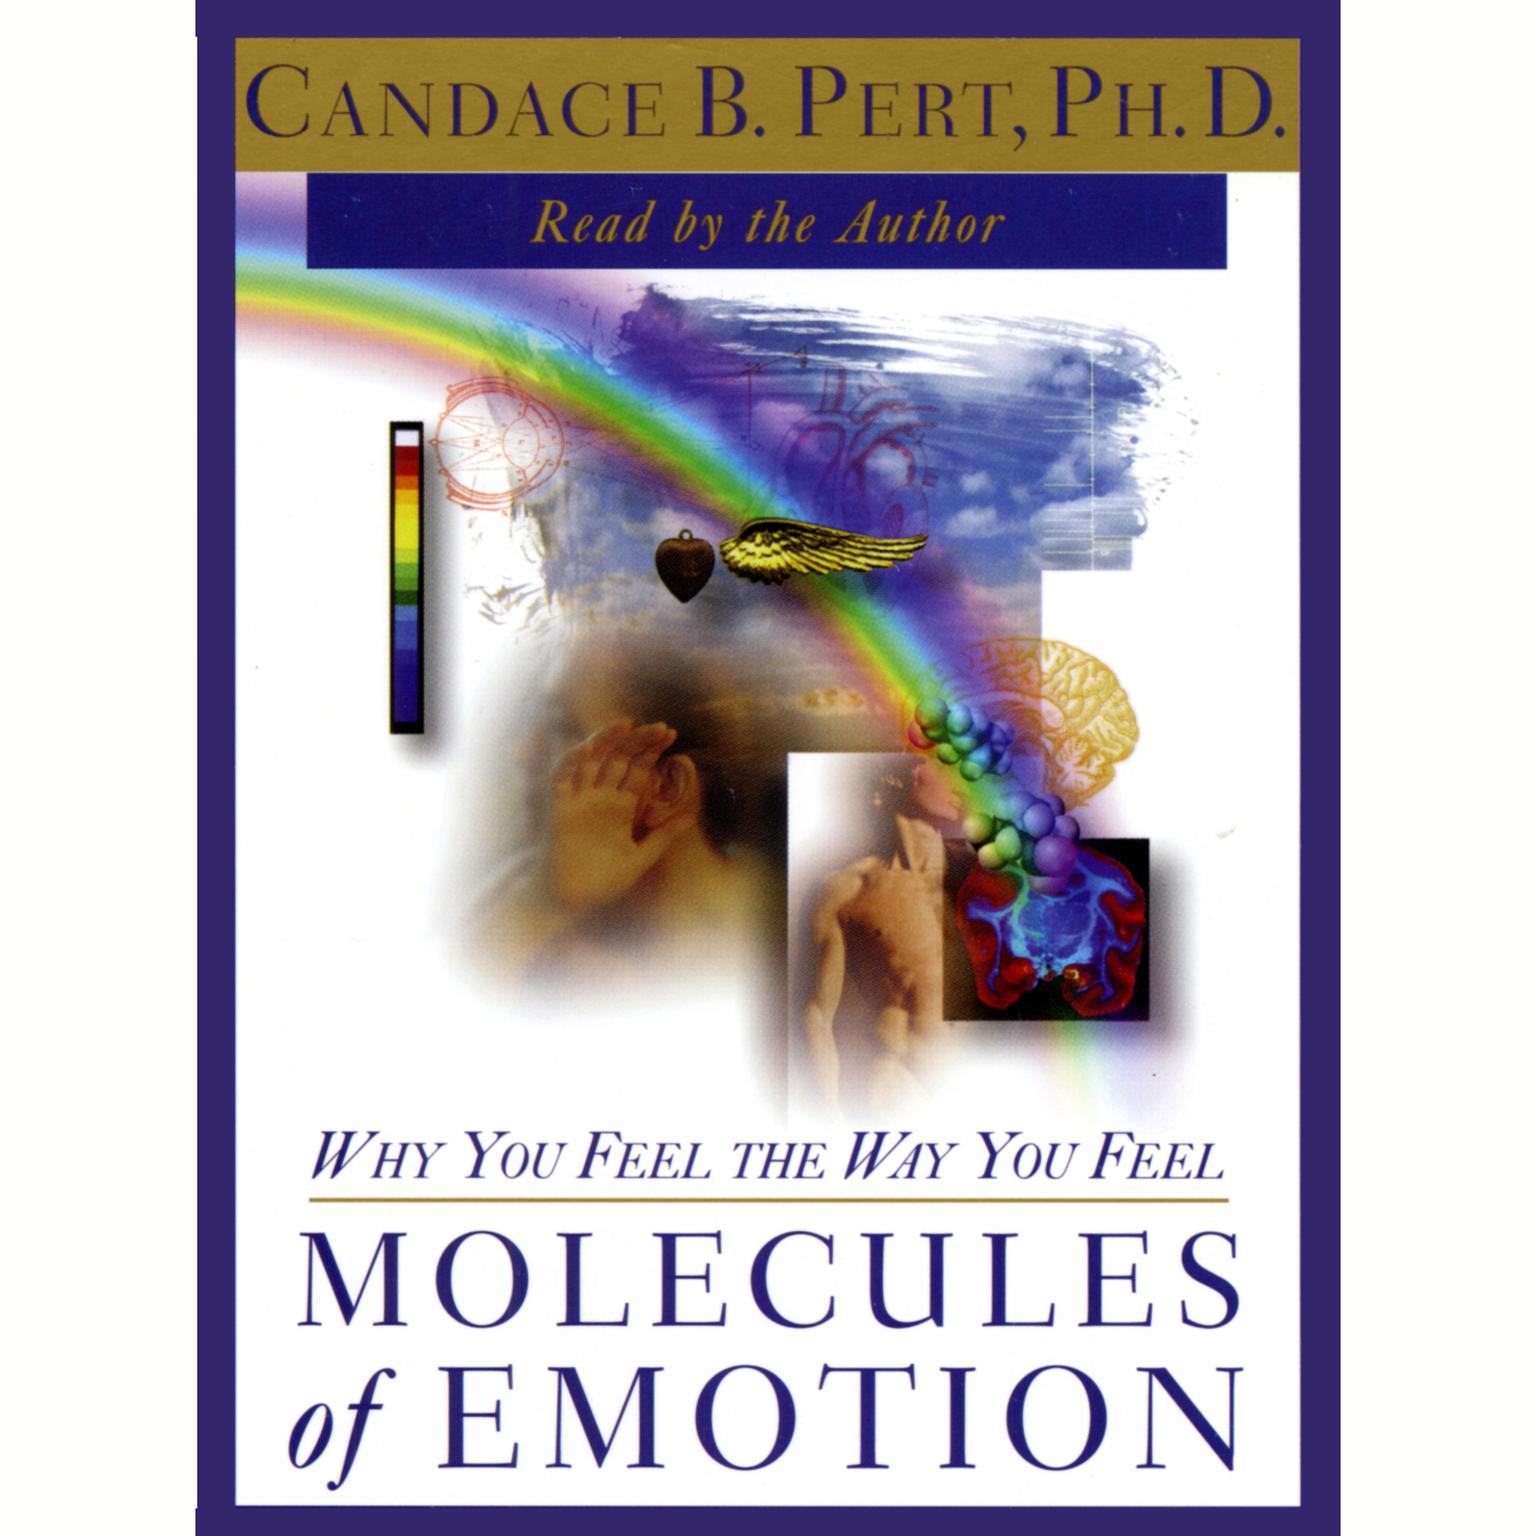 Molecules of Emotion (Abridged): Why You Feel the Way You Feel Audiobook, by Candace B. Pert